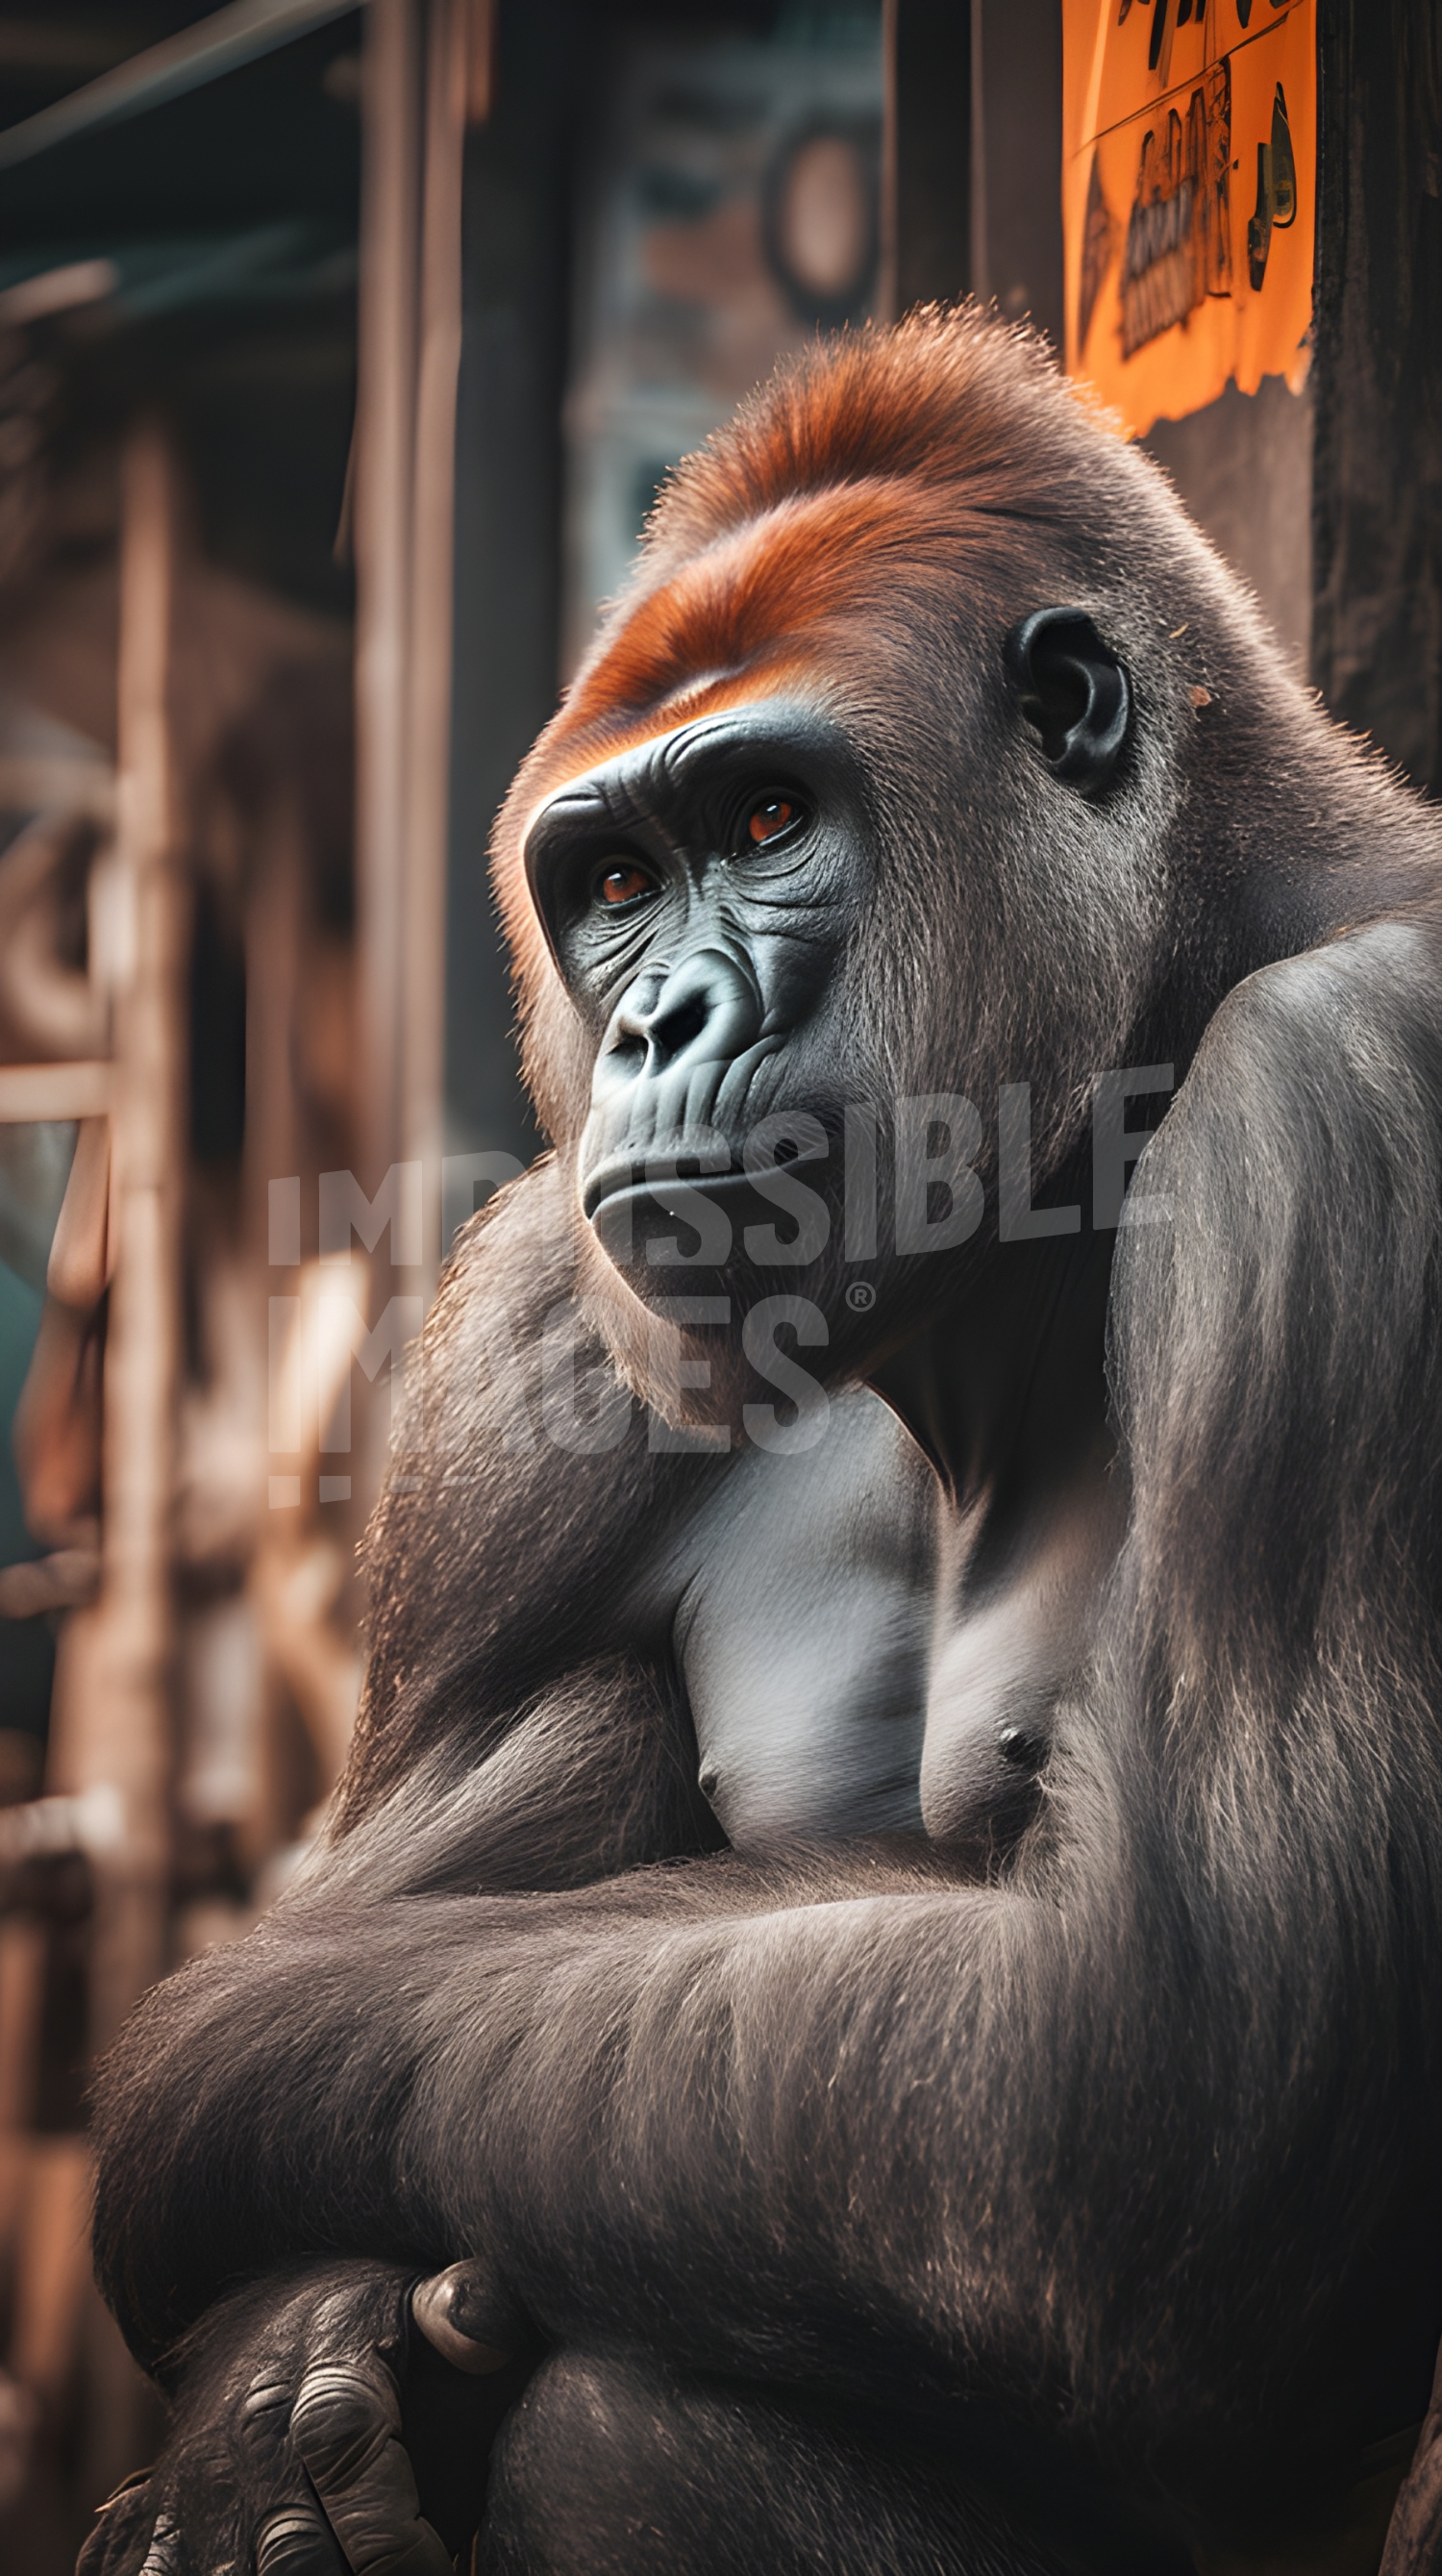 A gorilla sitting on top of a wooden table